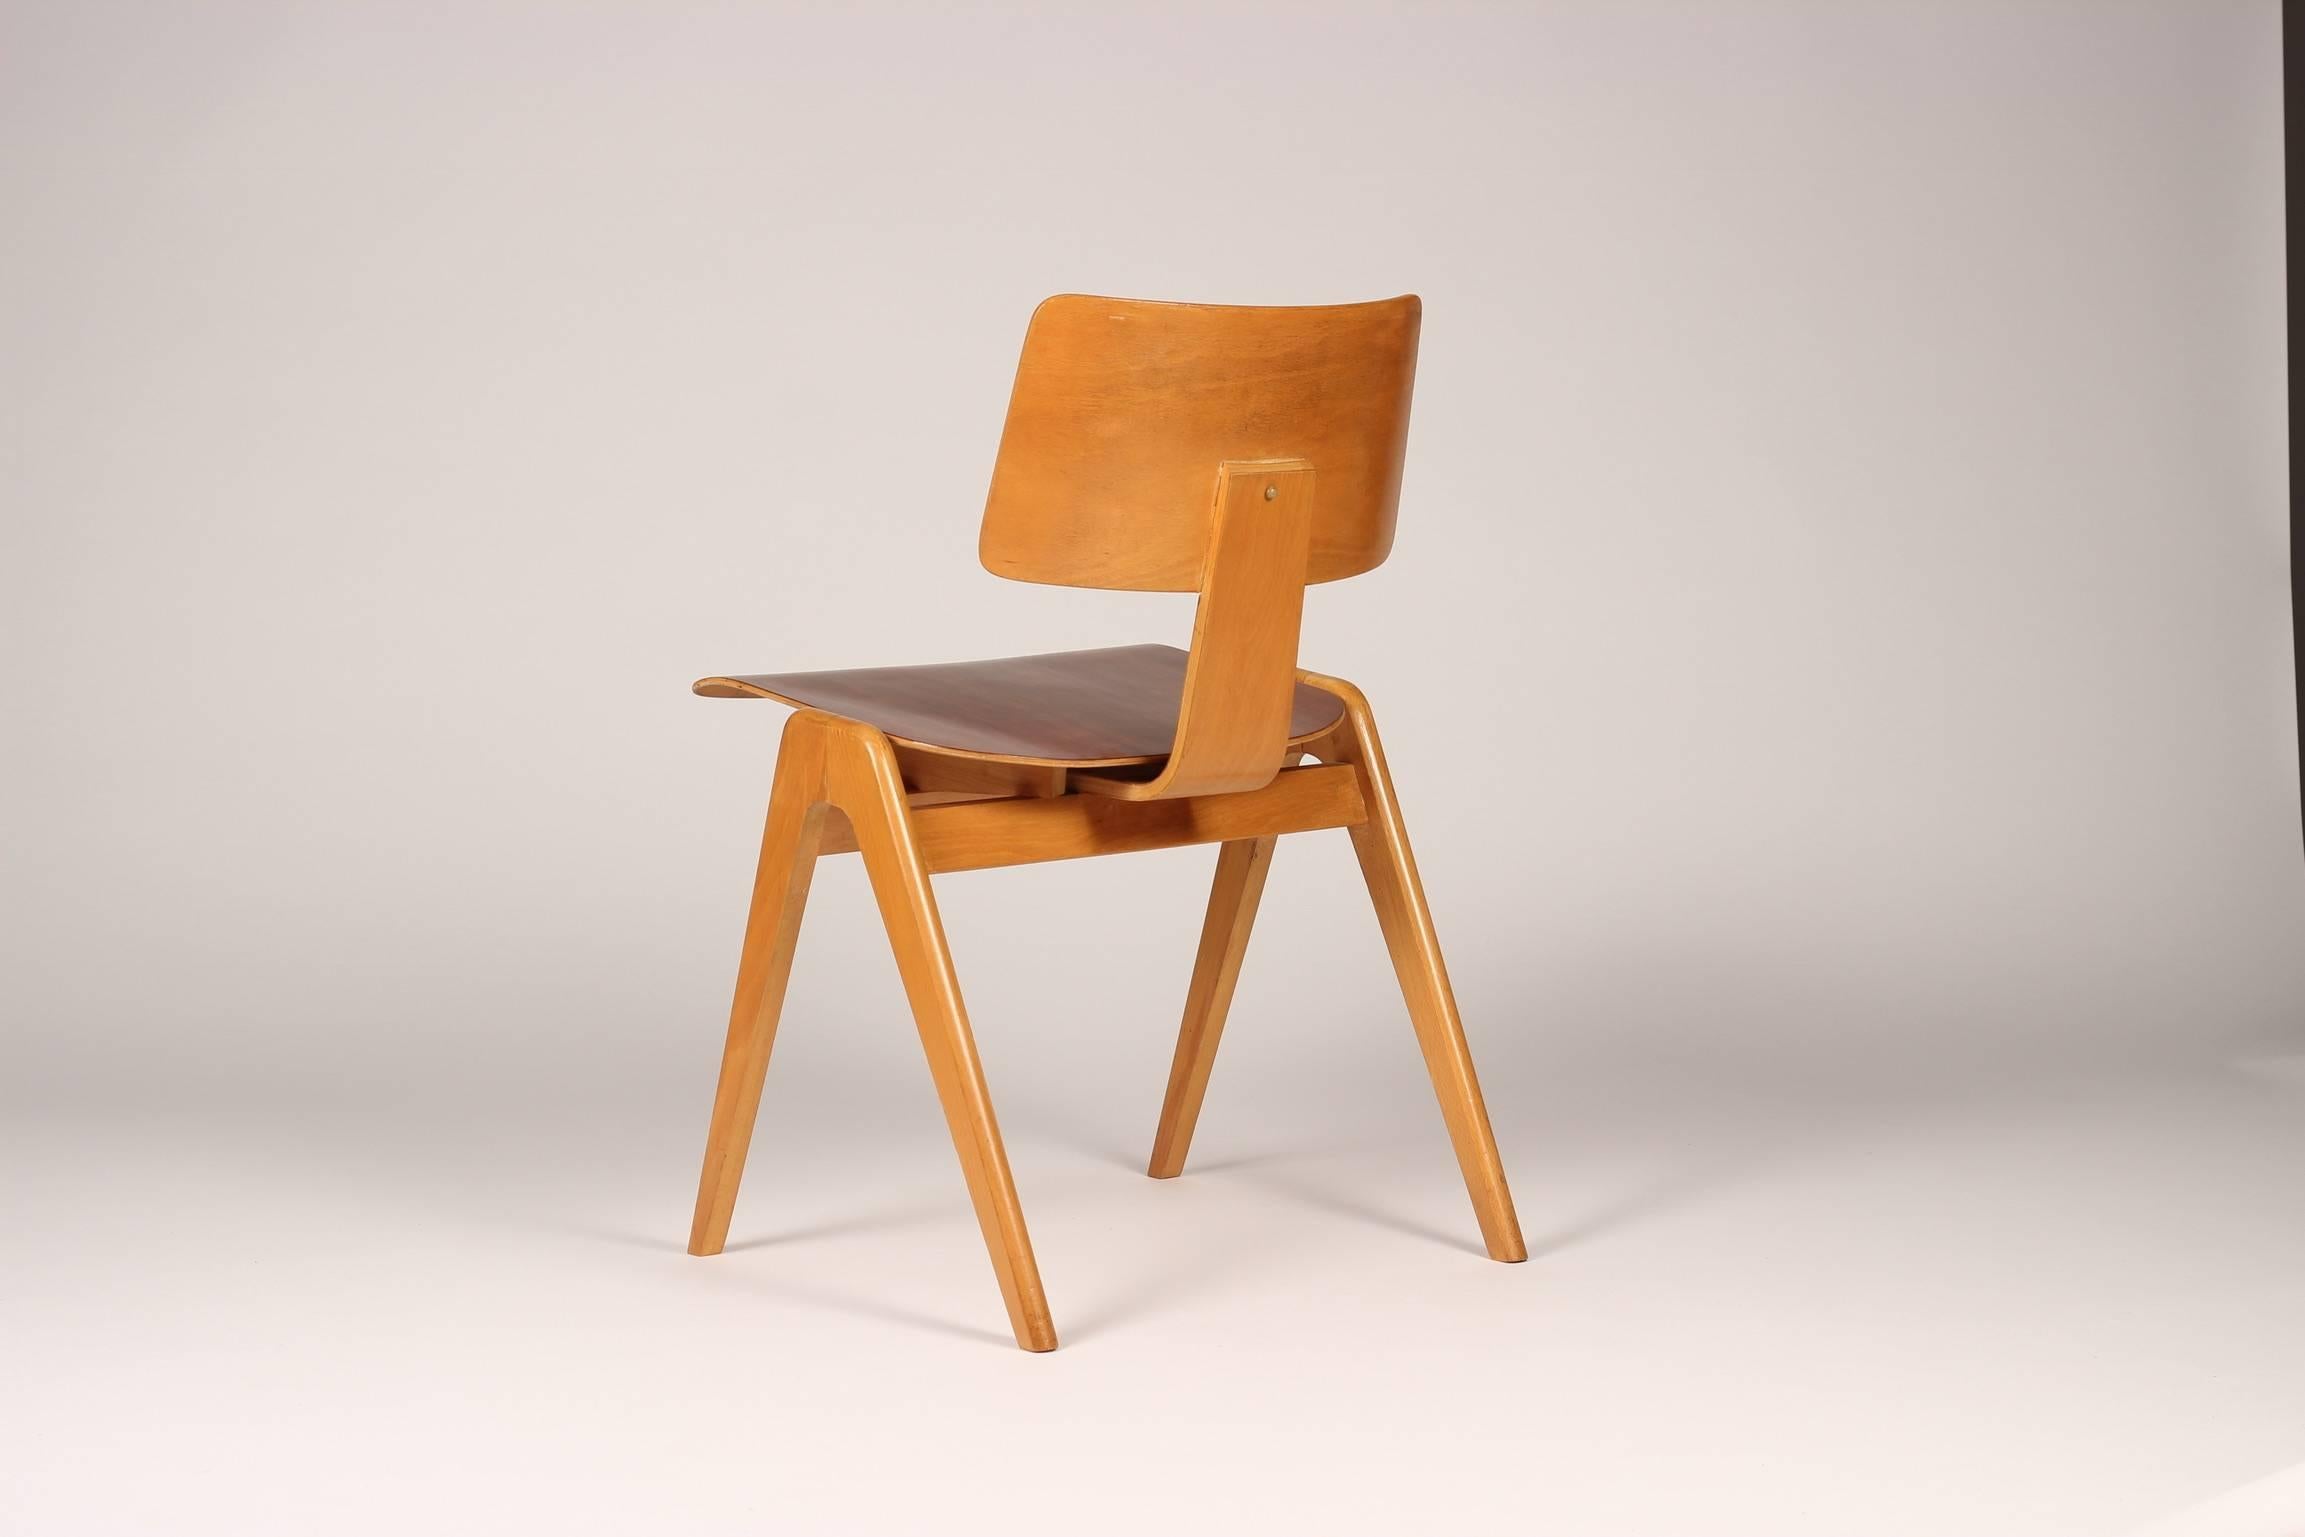 Robin Day was an iconic British Industrial designer, best known for his injection-moulded polypropylene stacking chairs – more than 20 million of which have been manufactured – and his later collaboration with Habitat. He rose to prominence in 1951